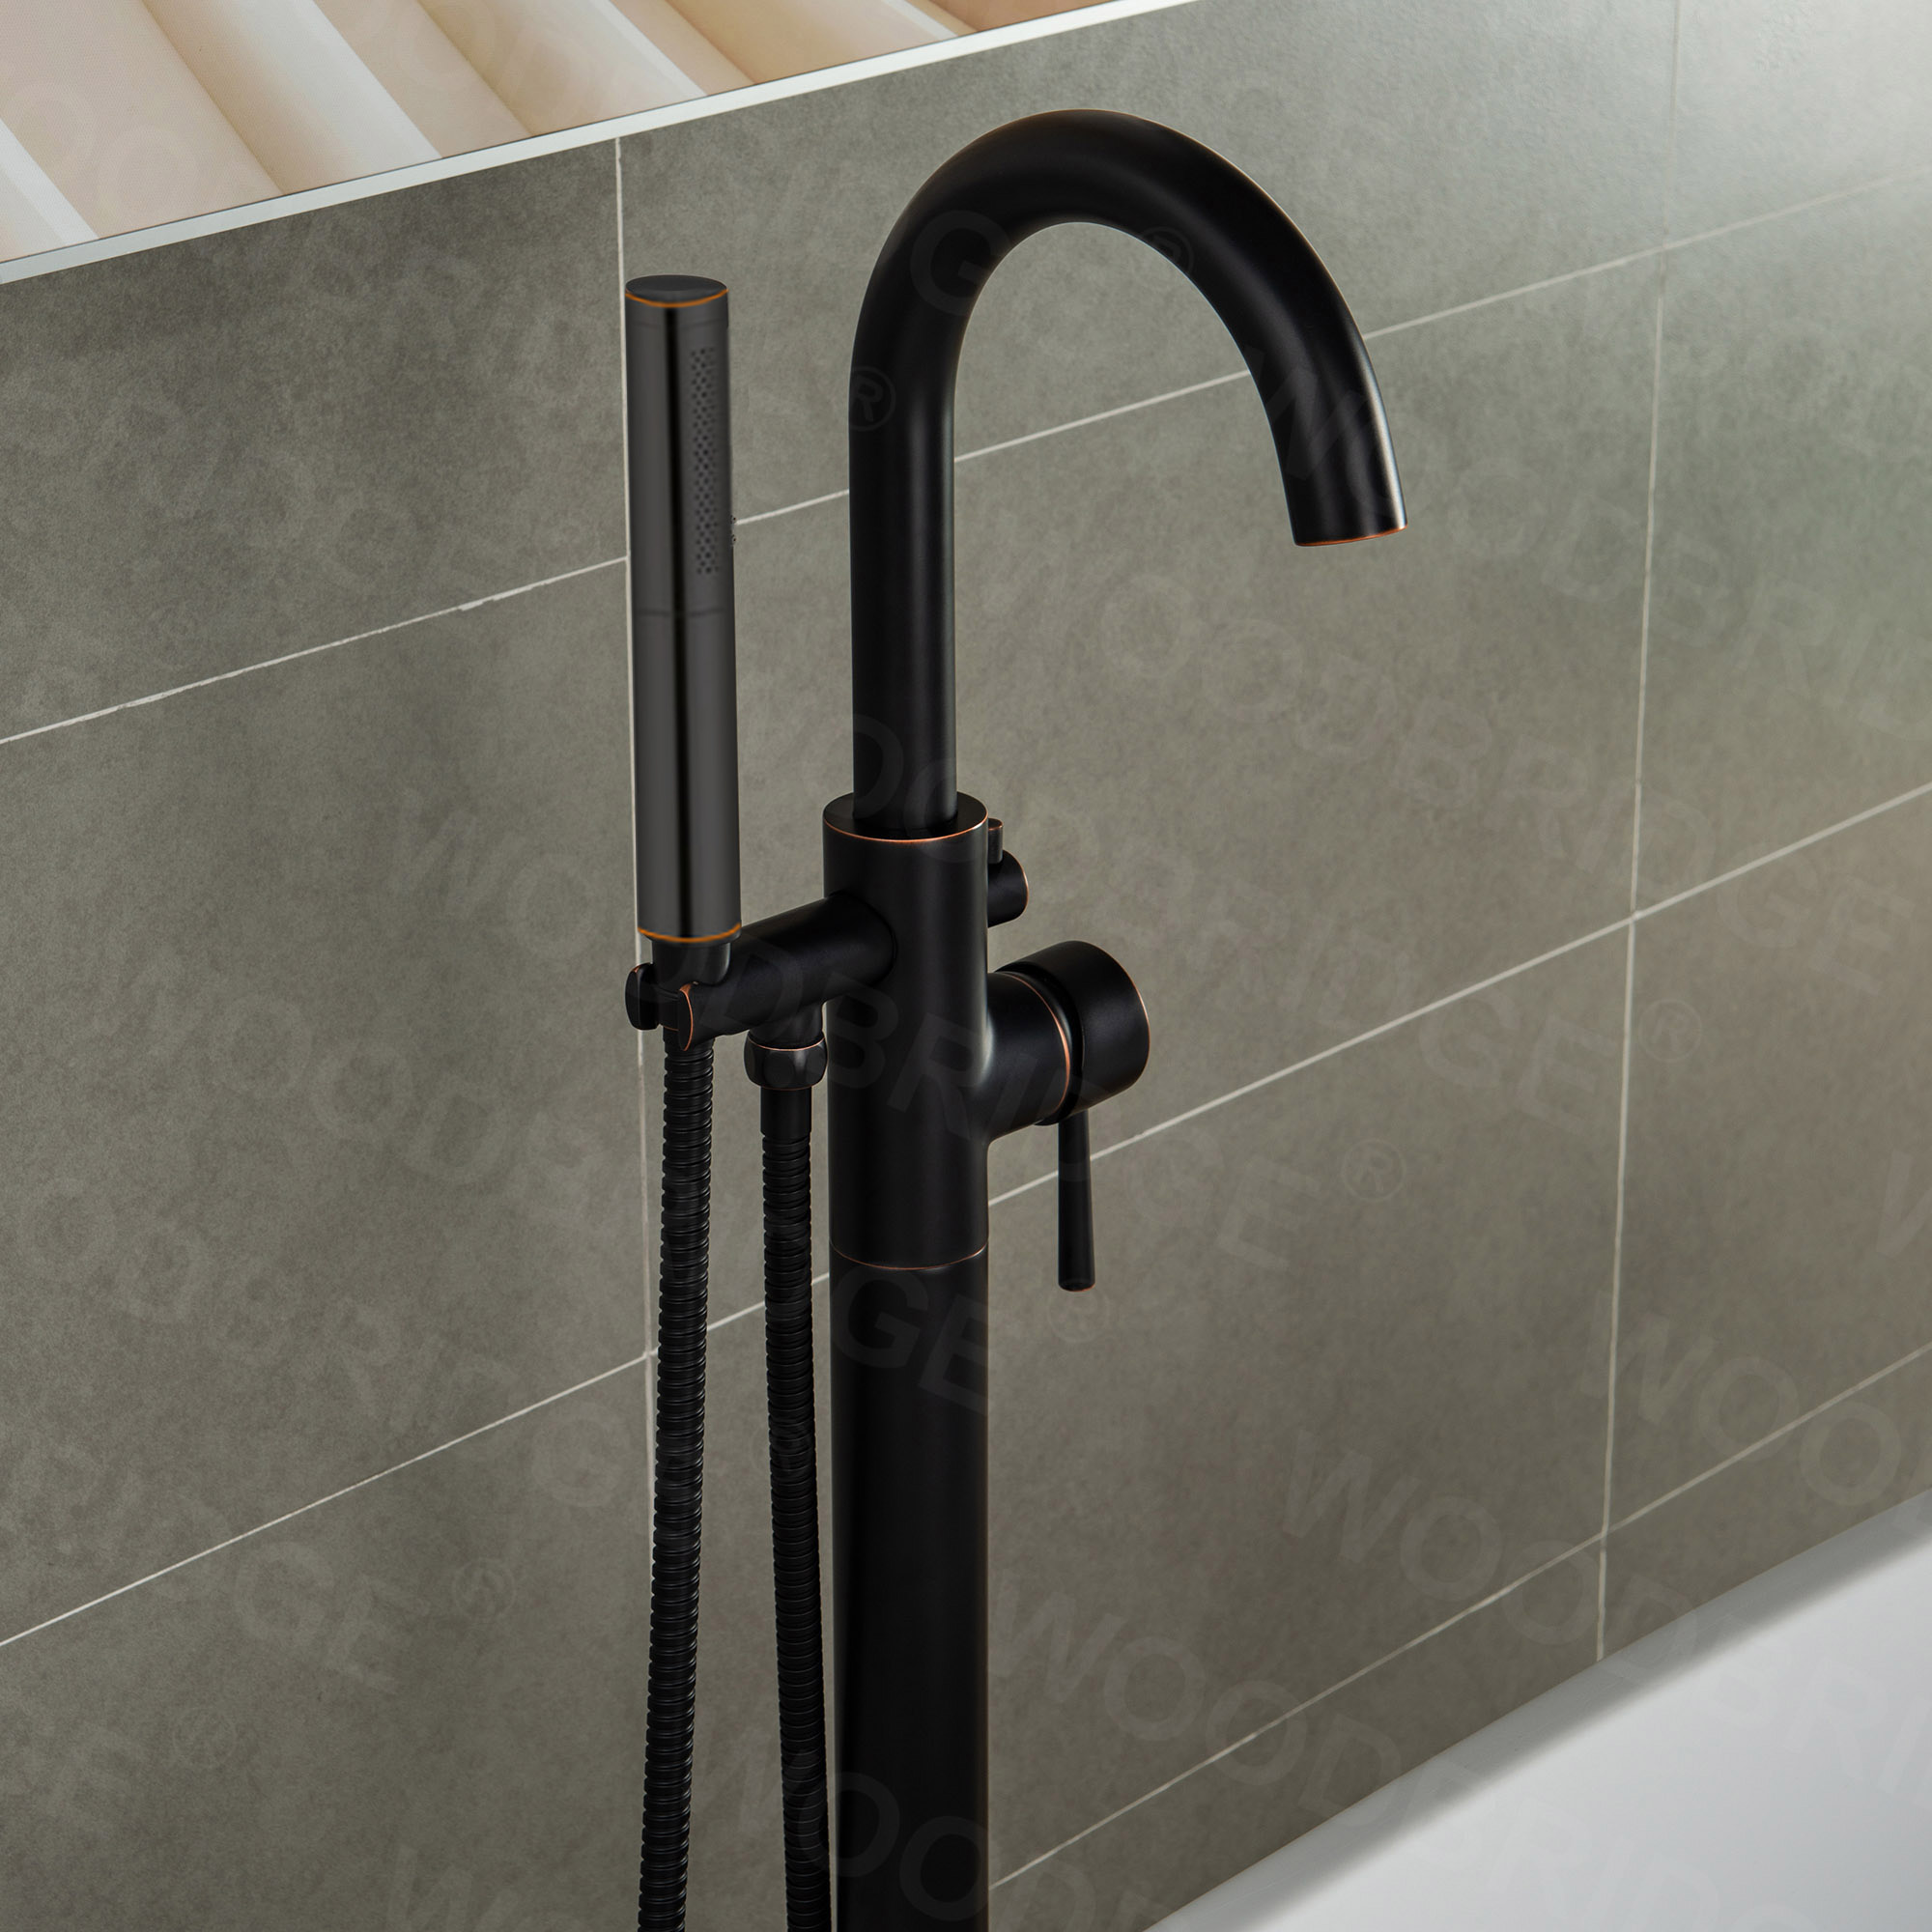  WOODBRIDGE F0010ORBDR Contemporary Single Handle Floor Mount Freestanding Tub Filler Faucet with Hand shower in Oil Rubbed Bronze Finish._14273